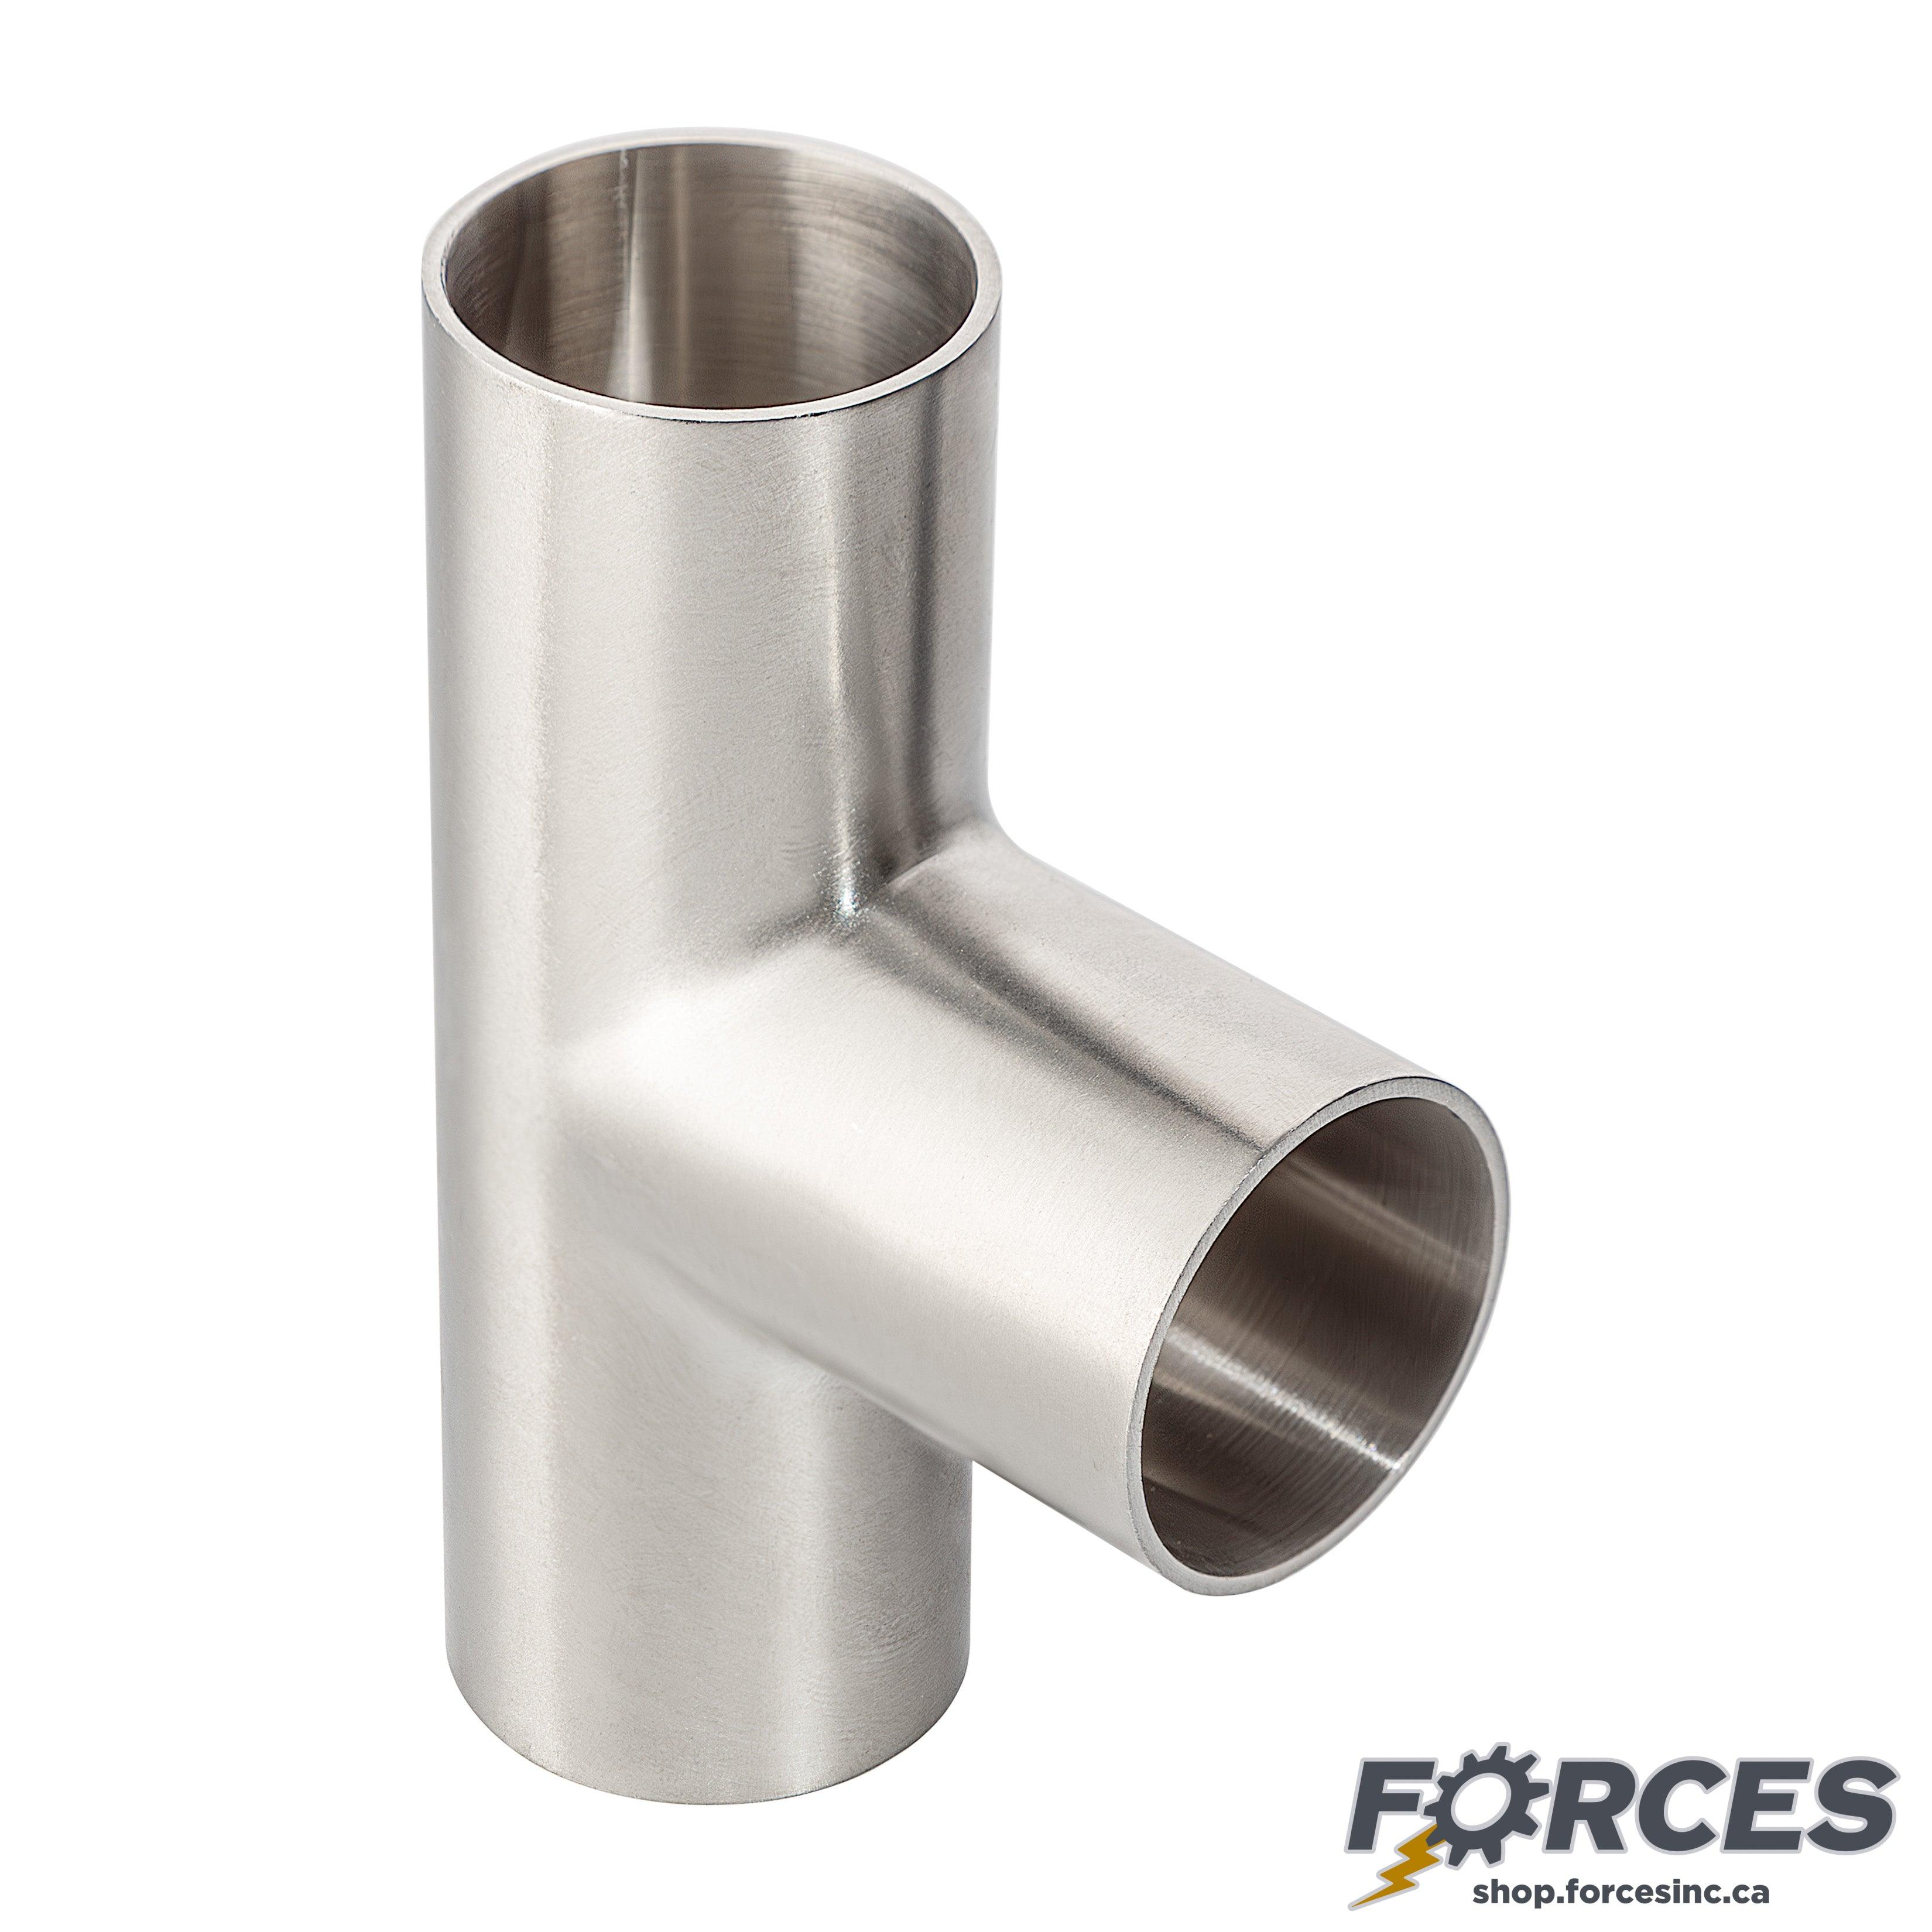 3" Butt Weld Long Tee - Stainless Steel 316 - Forces Inc